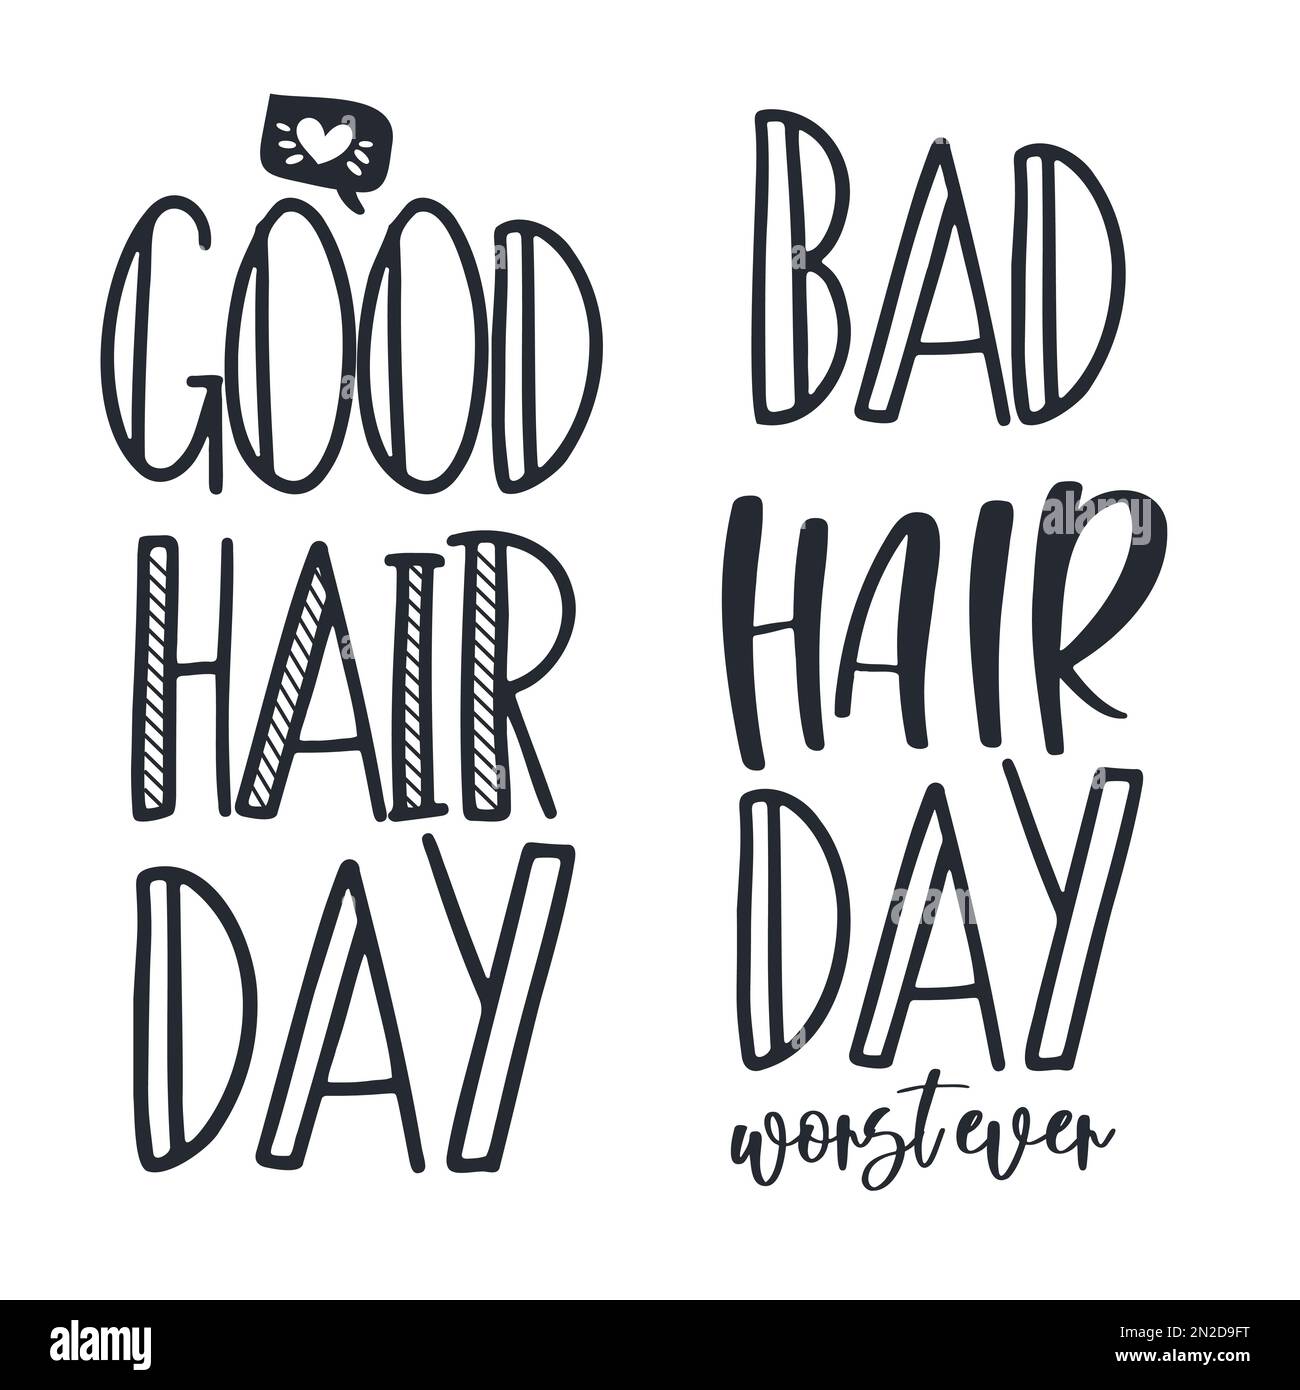 Good and Bad hair day. Messy hair vector quotes. Stock Vector